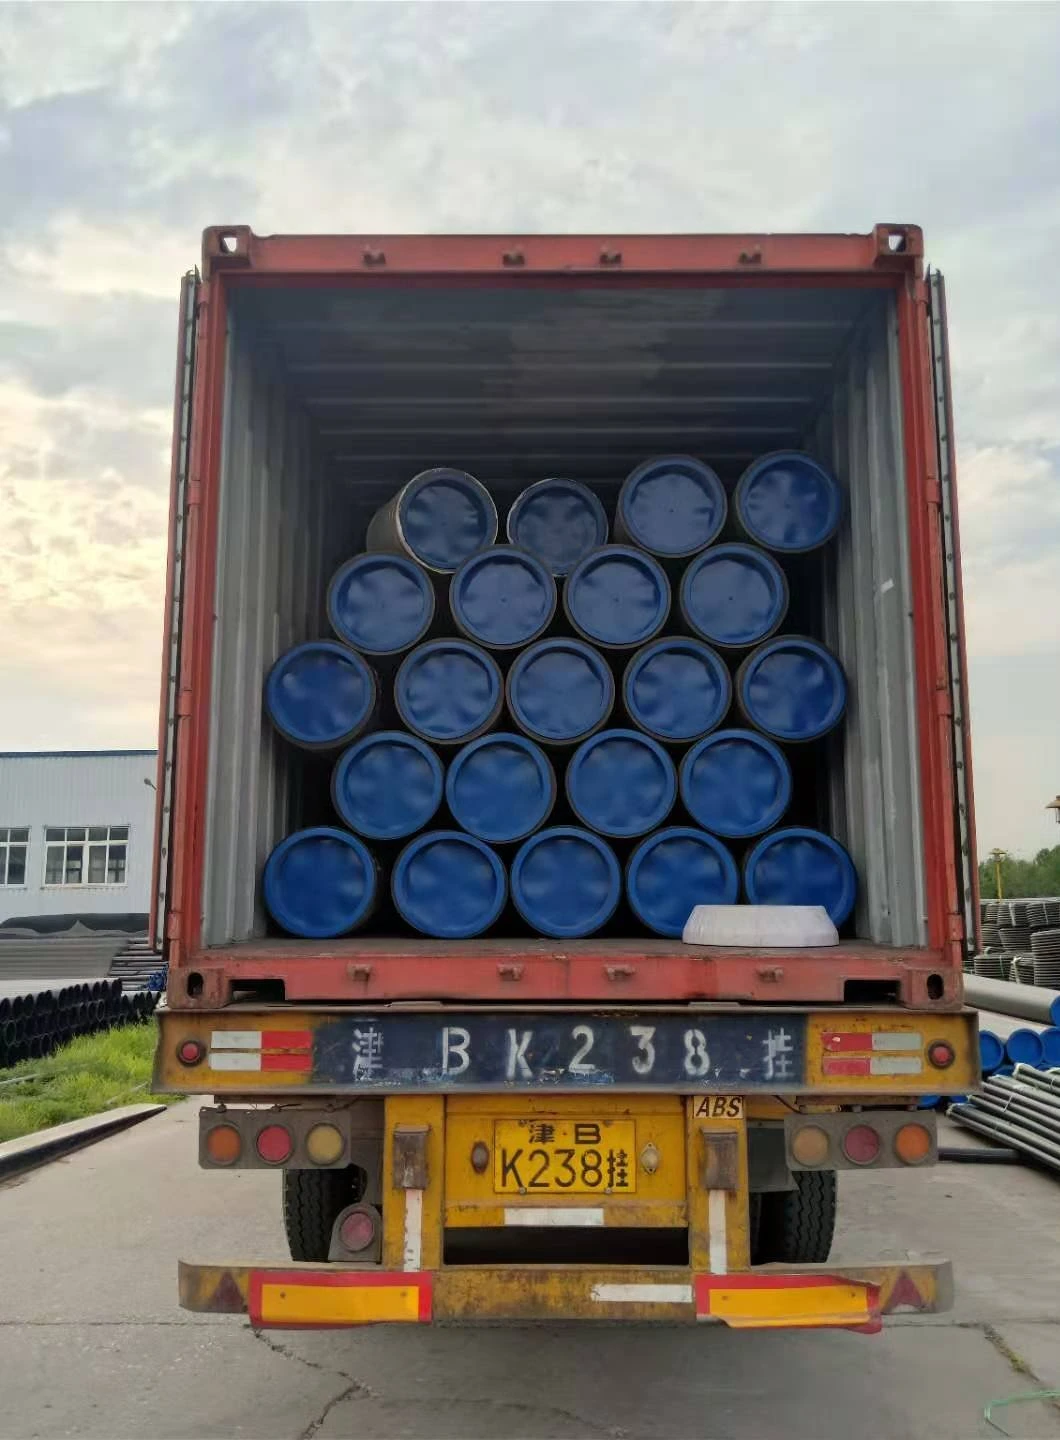 Dn20-Dn1200 Full Range HDPE Pipe for Water Supply